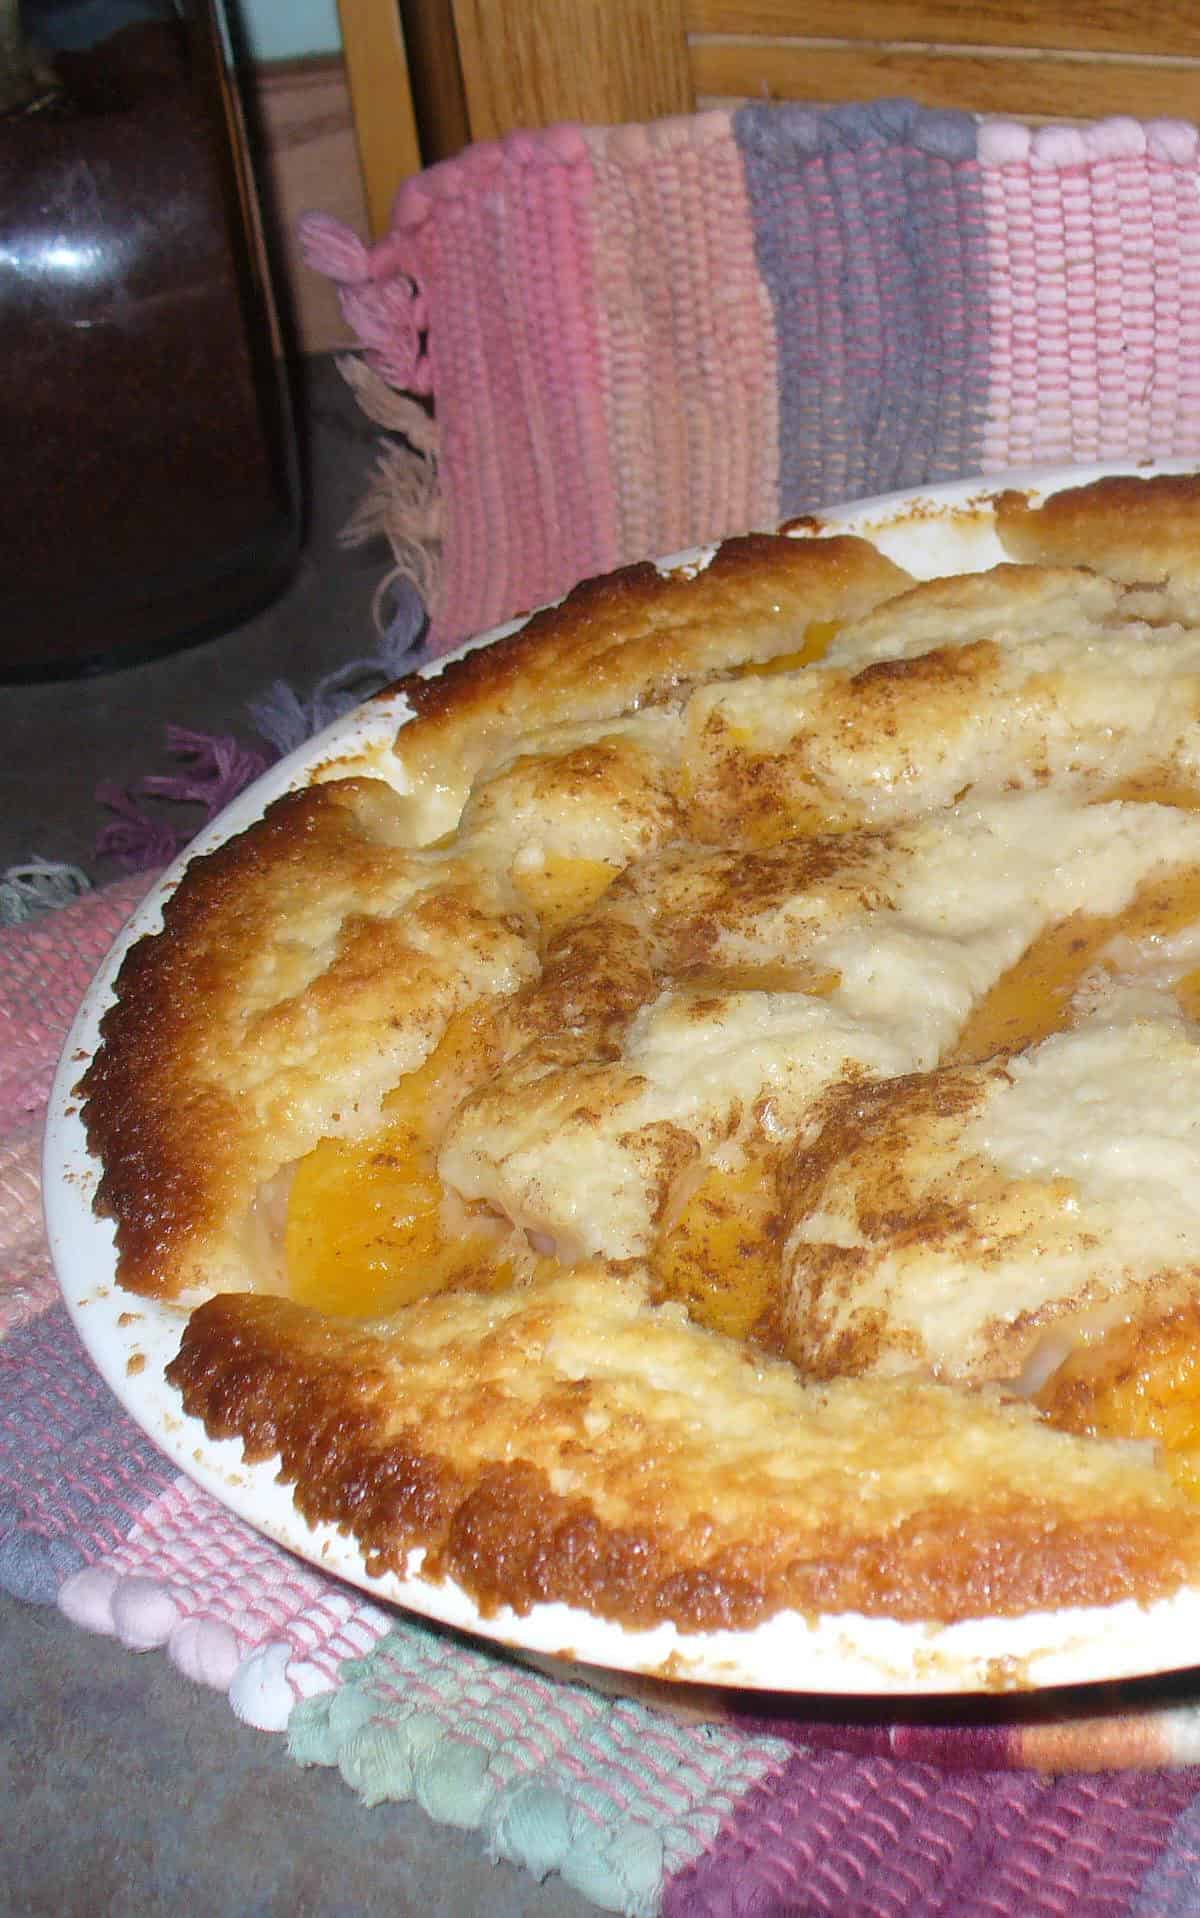  Sweet and juicy peaches are the star of this Lazy Peach Pie.